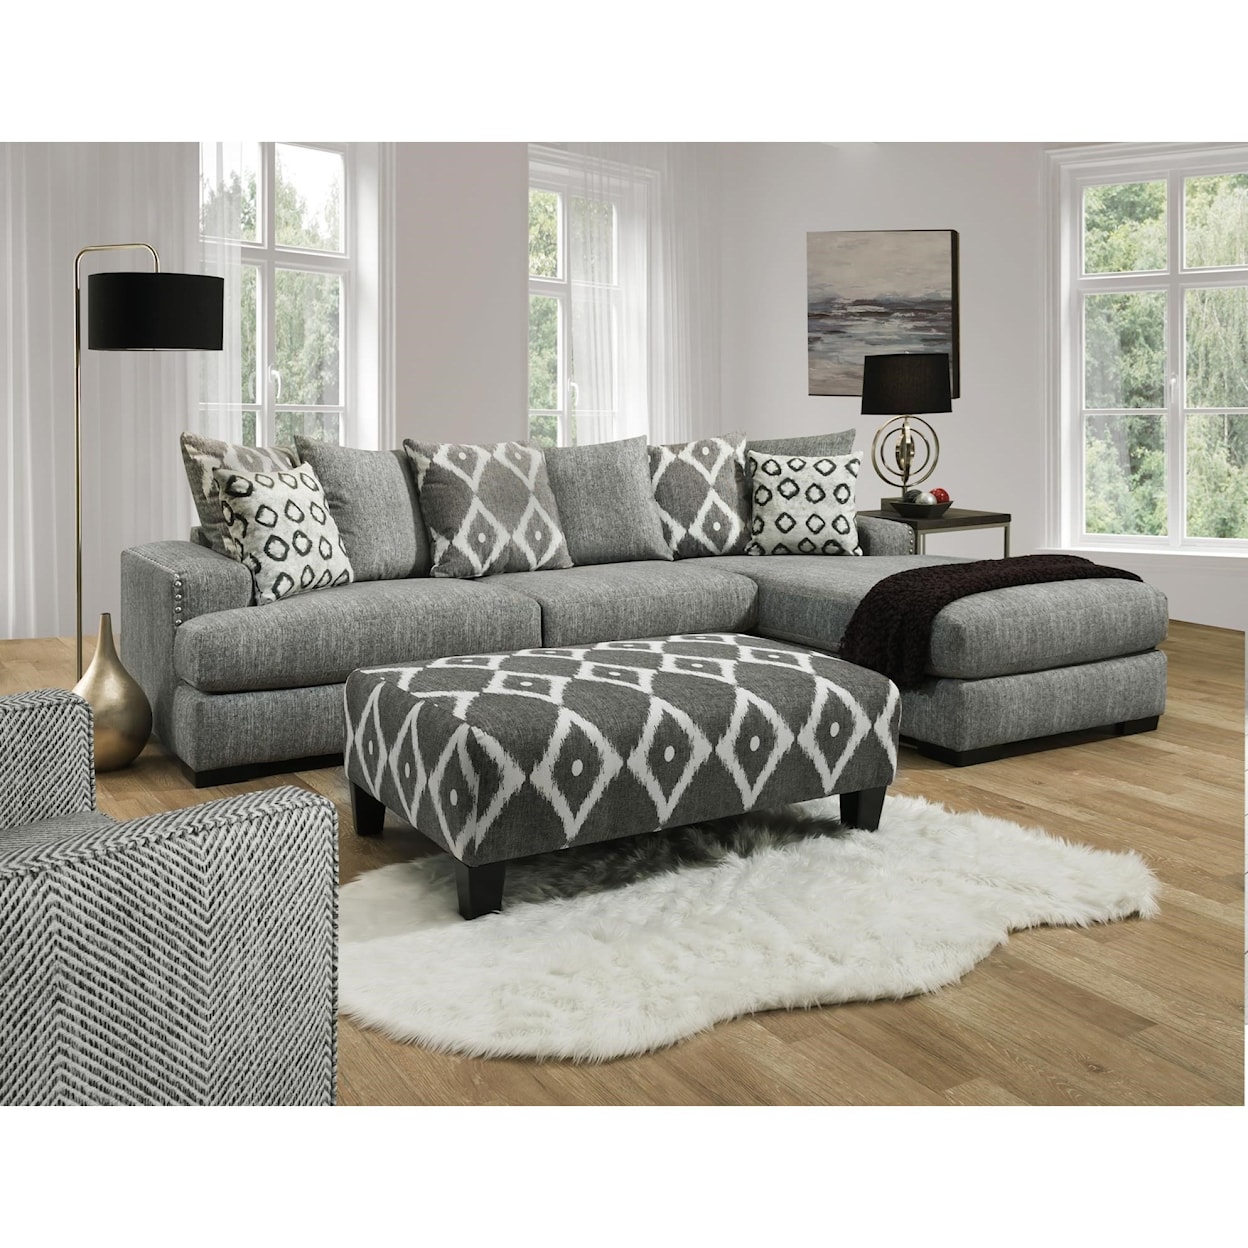 Albany 883 2 Piece Sectional Sofa